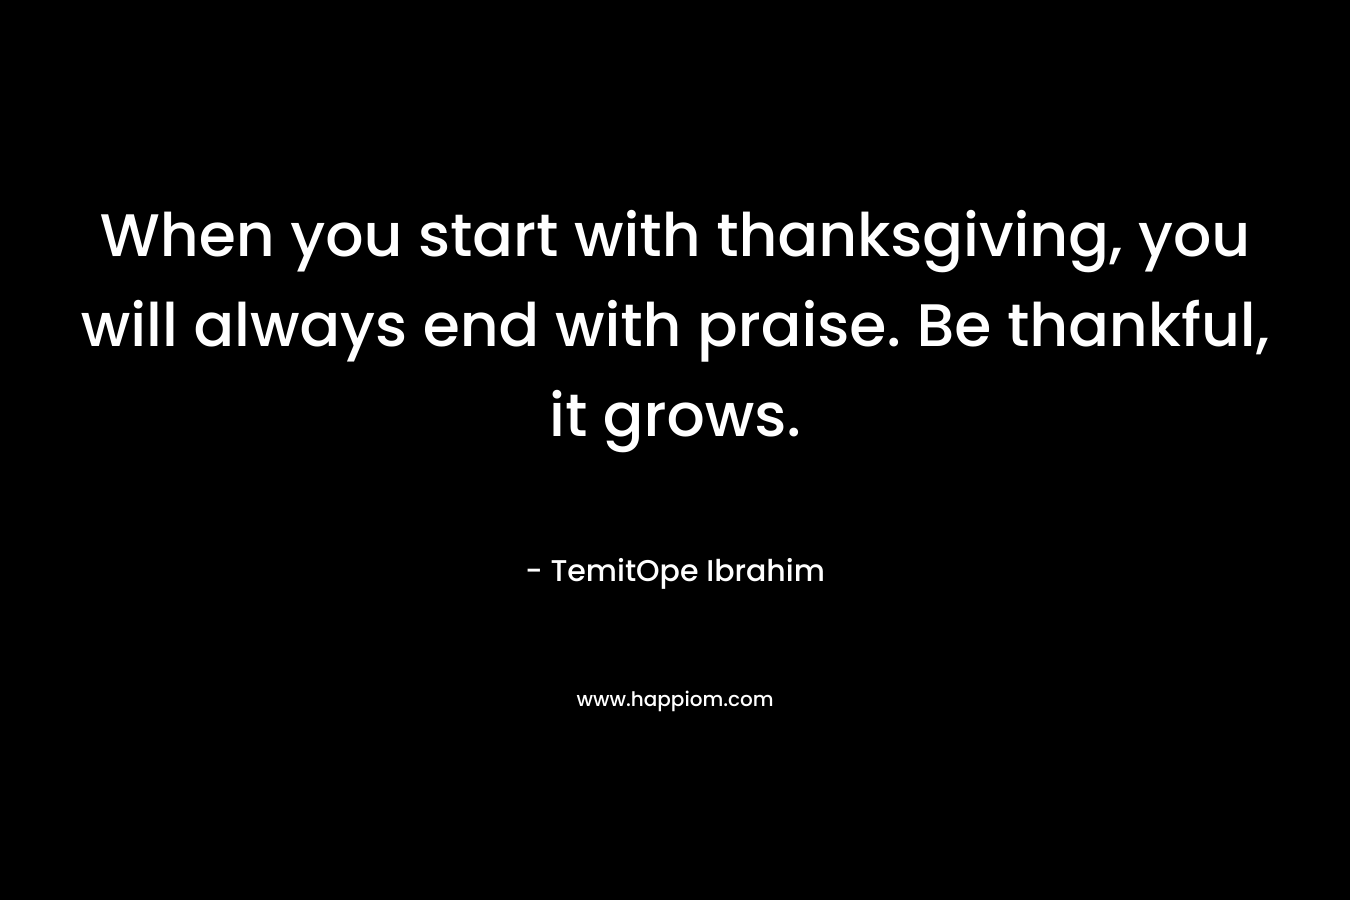 When you start with thanksgiving, you will always end with praise. Be thankful, it grows.